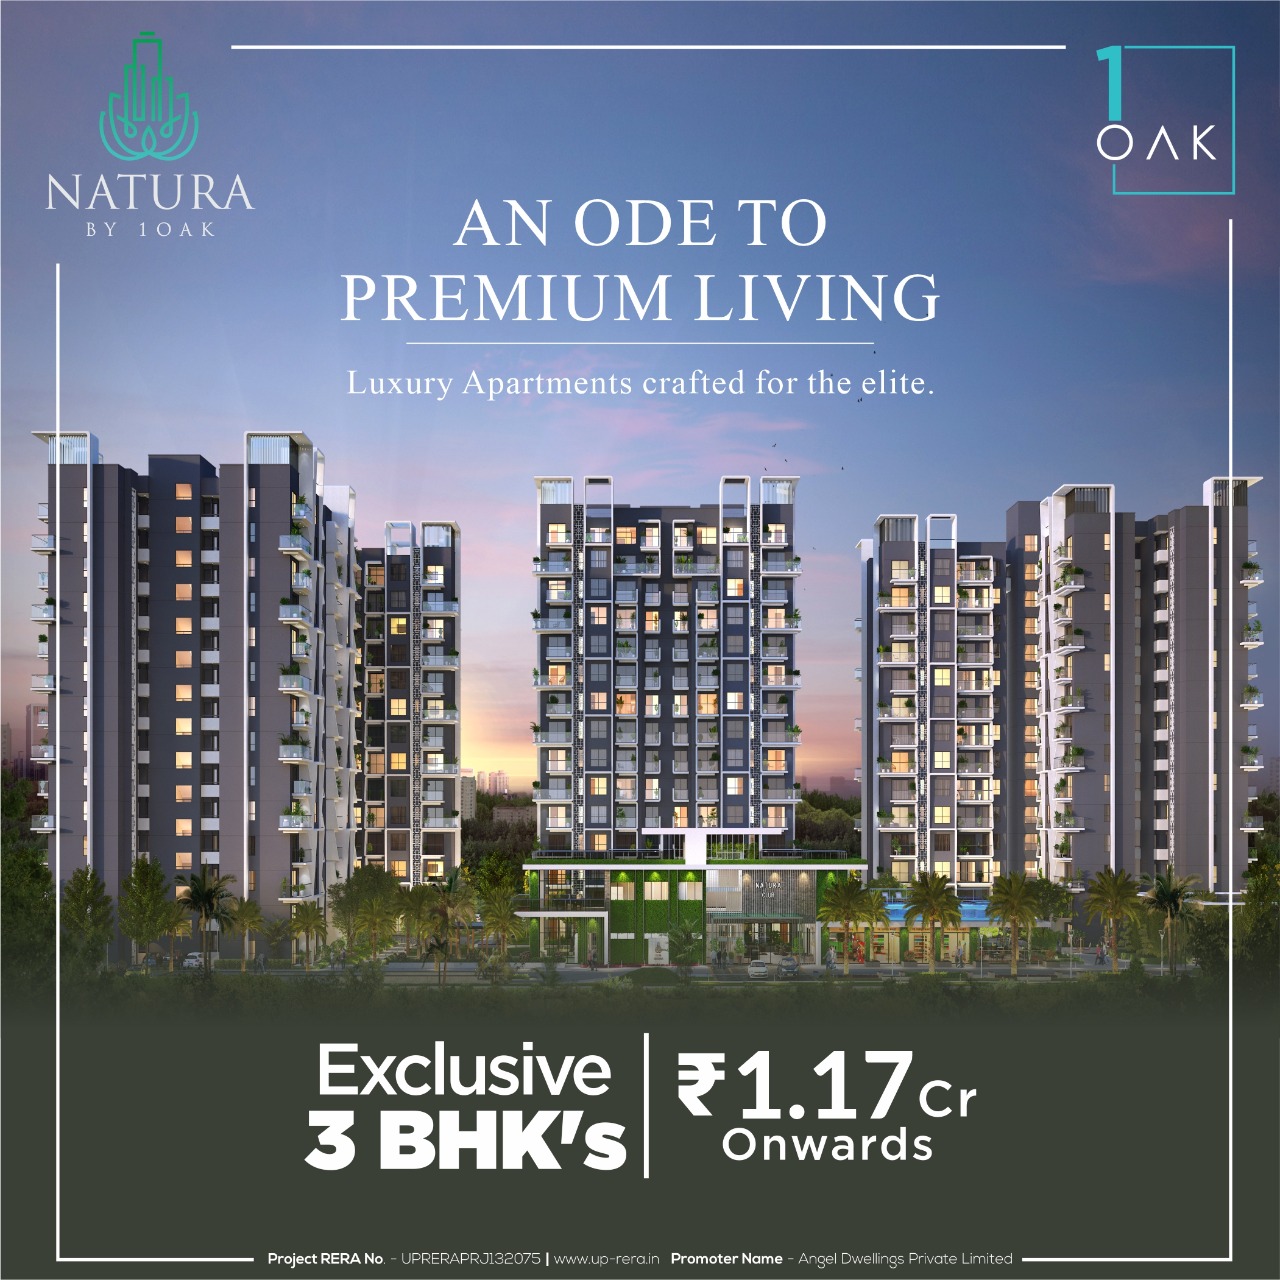 Exclusive 3 BHK Price starting Rs 1.17 Cr at 1OAK Natura, Lucknow Update